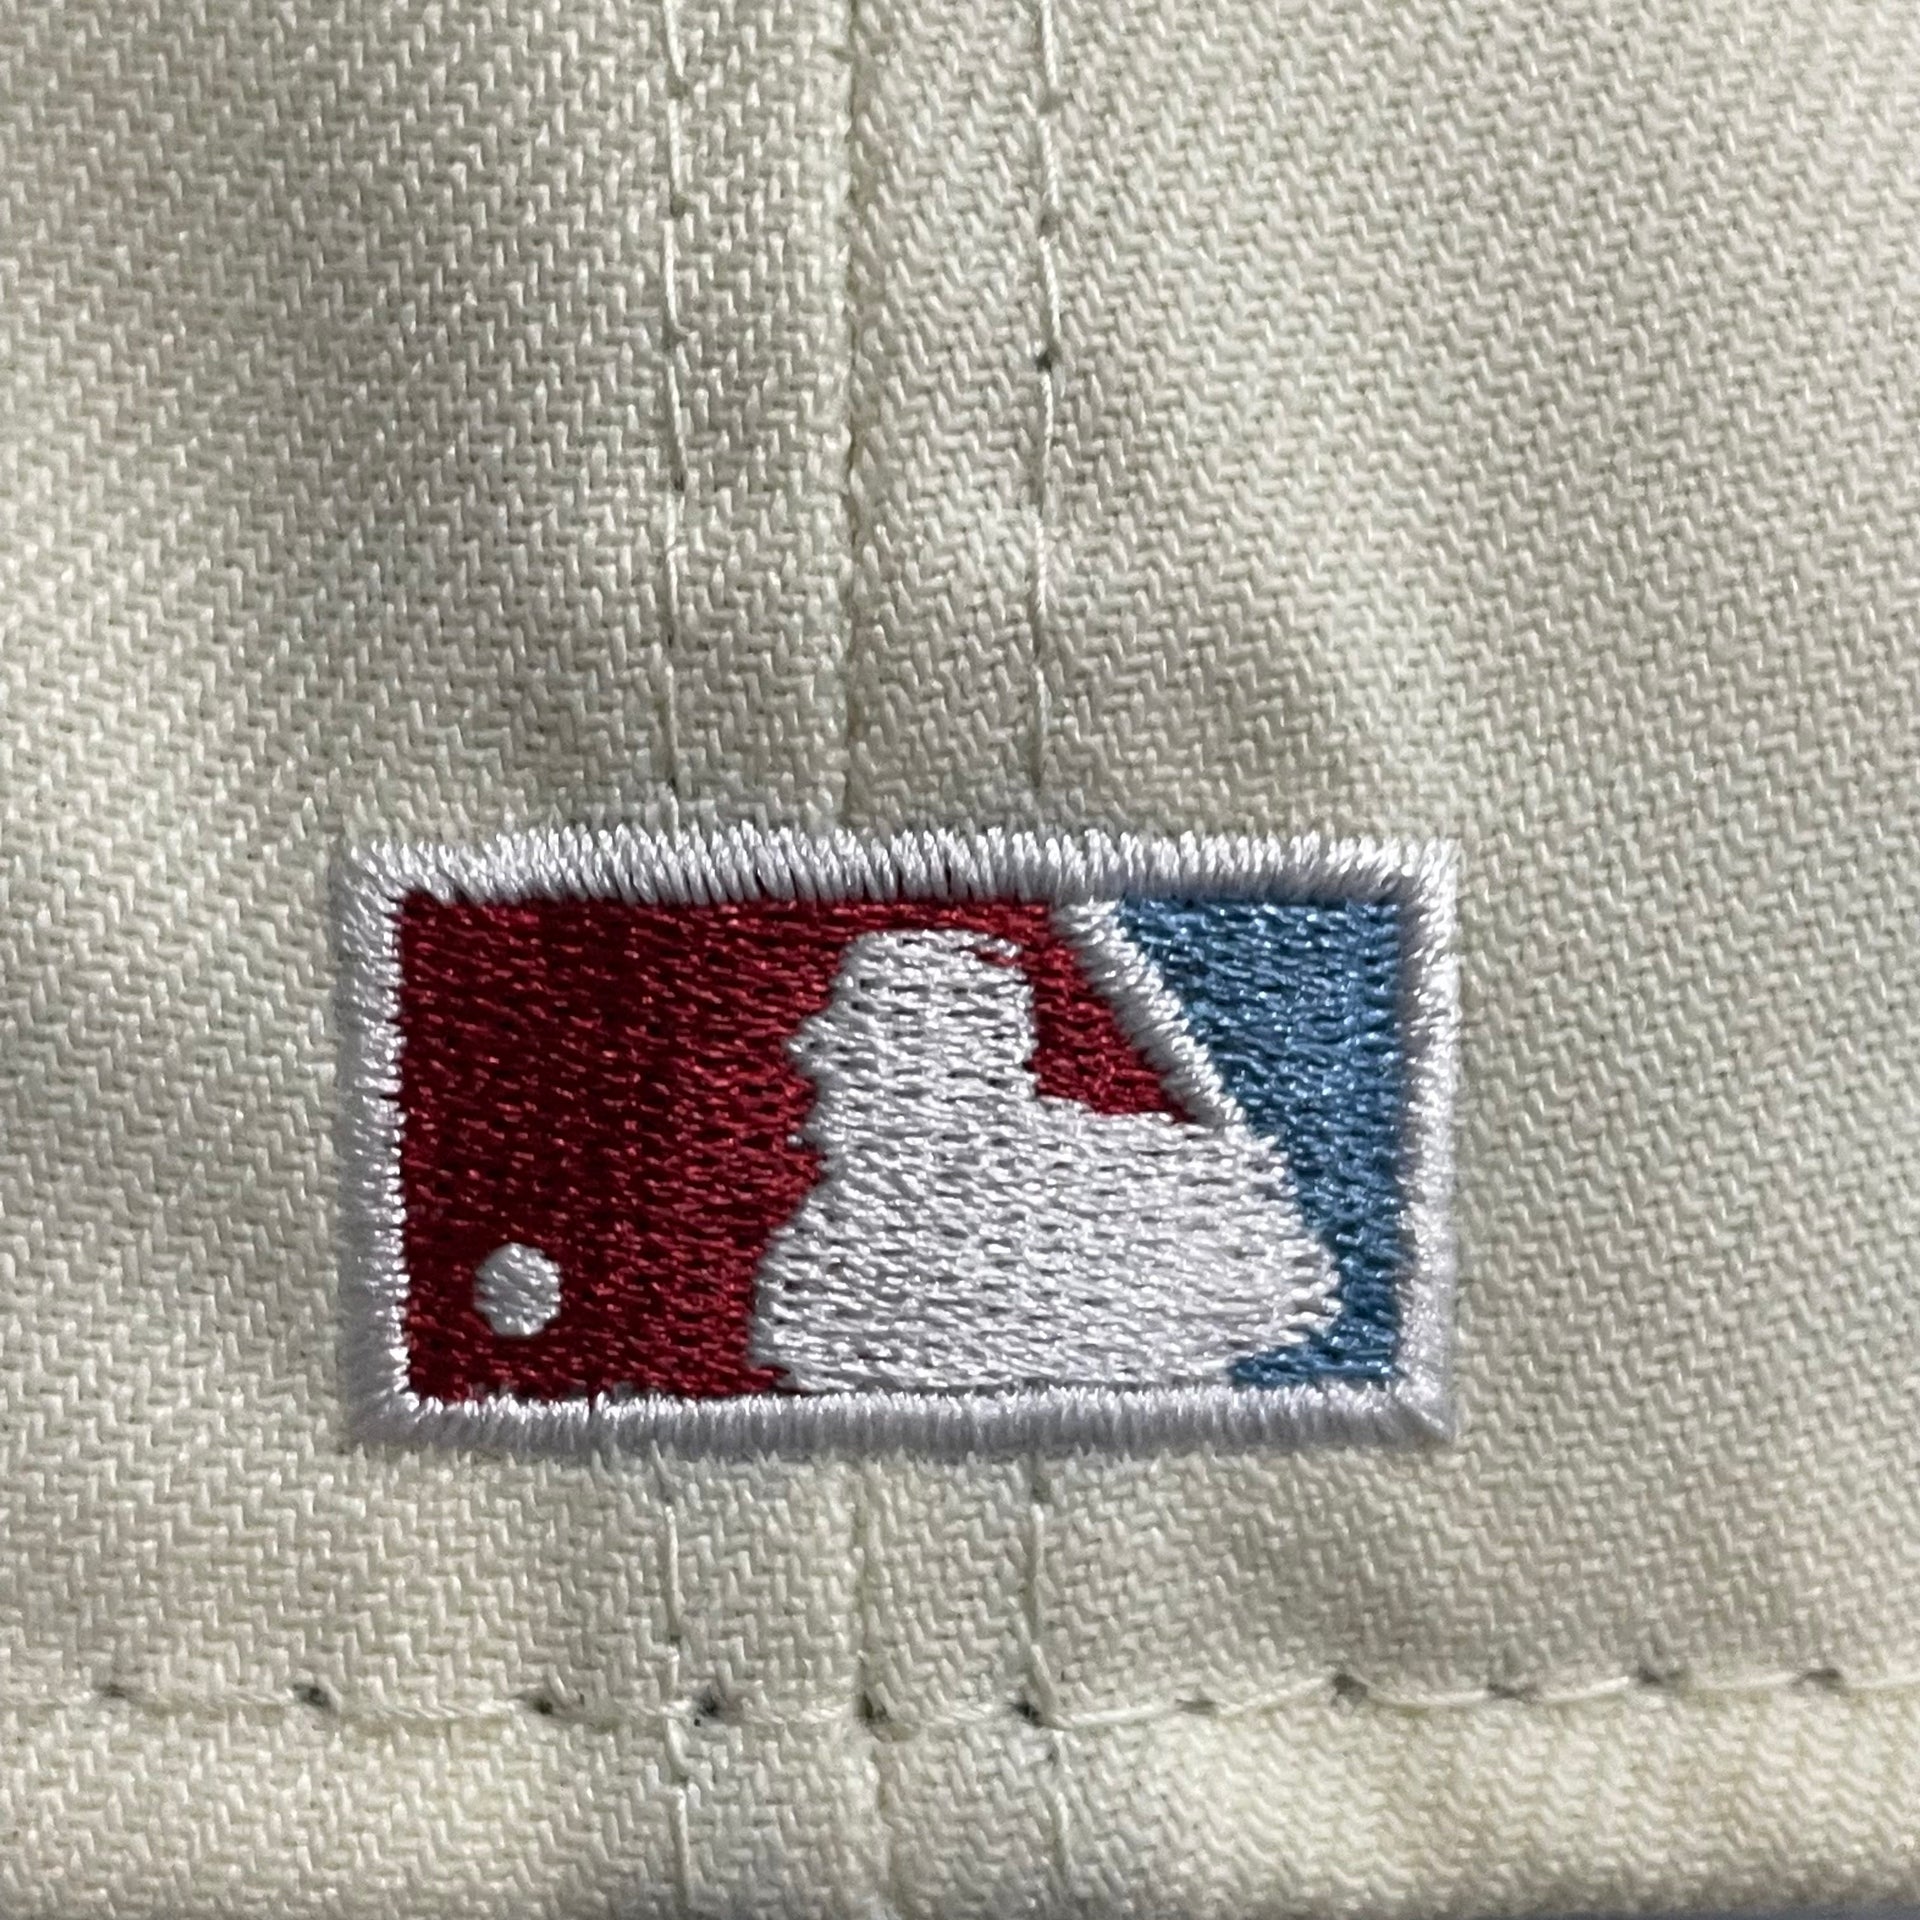 Close up of the cooperstown flat batterman logo of the Philadelphia Phillies Cooperstown Retro Logo 1980 World Series Champion Side Patch Grey UV 59Fifty Fitted Cap | Chrome/Maroon Cap Swag Exclusive